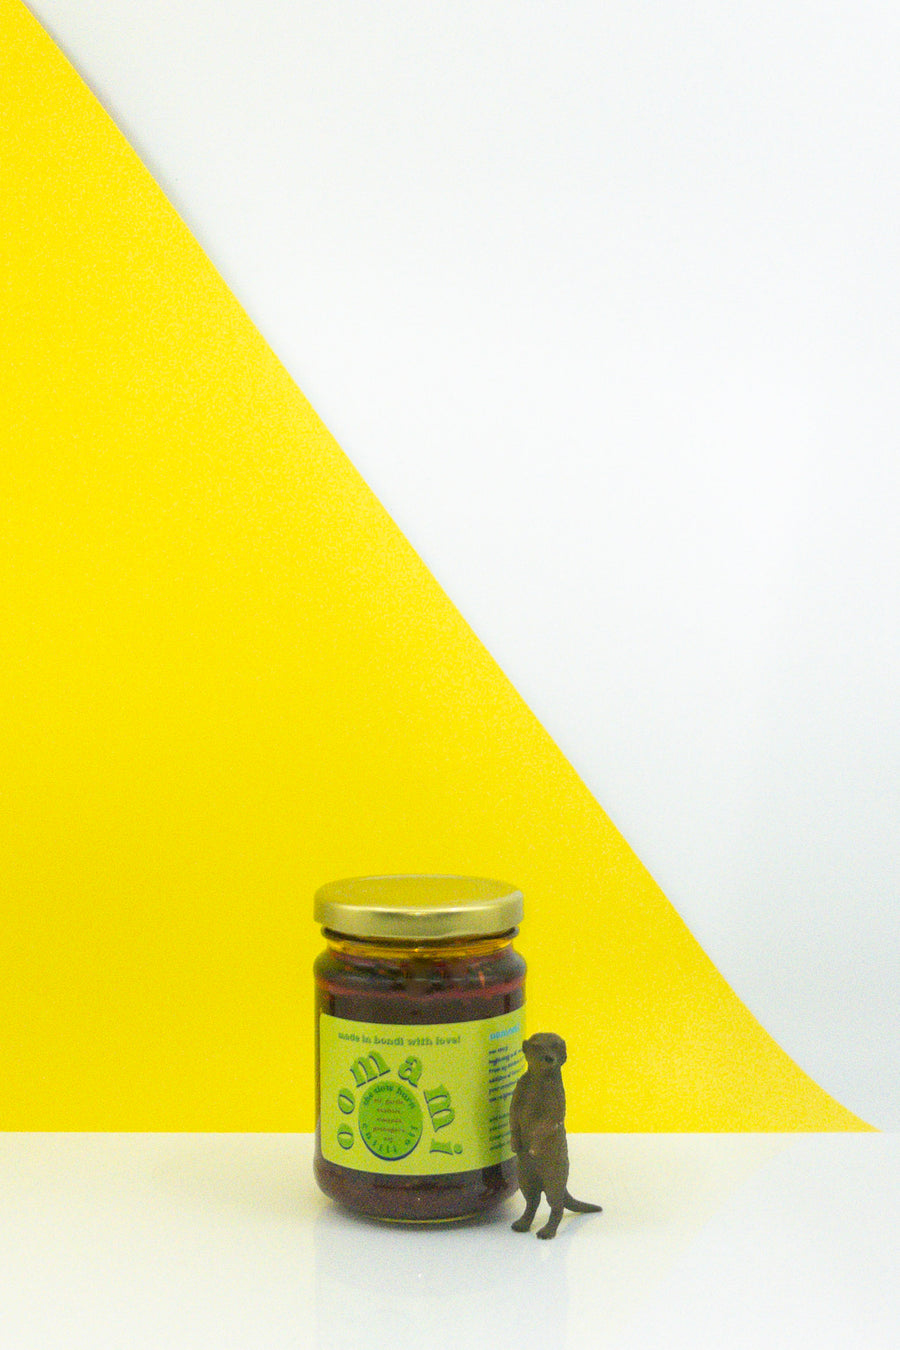 Oomami Sydney The Slow Burn Chilli Oil Japanese Chilli Oil